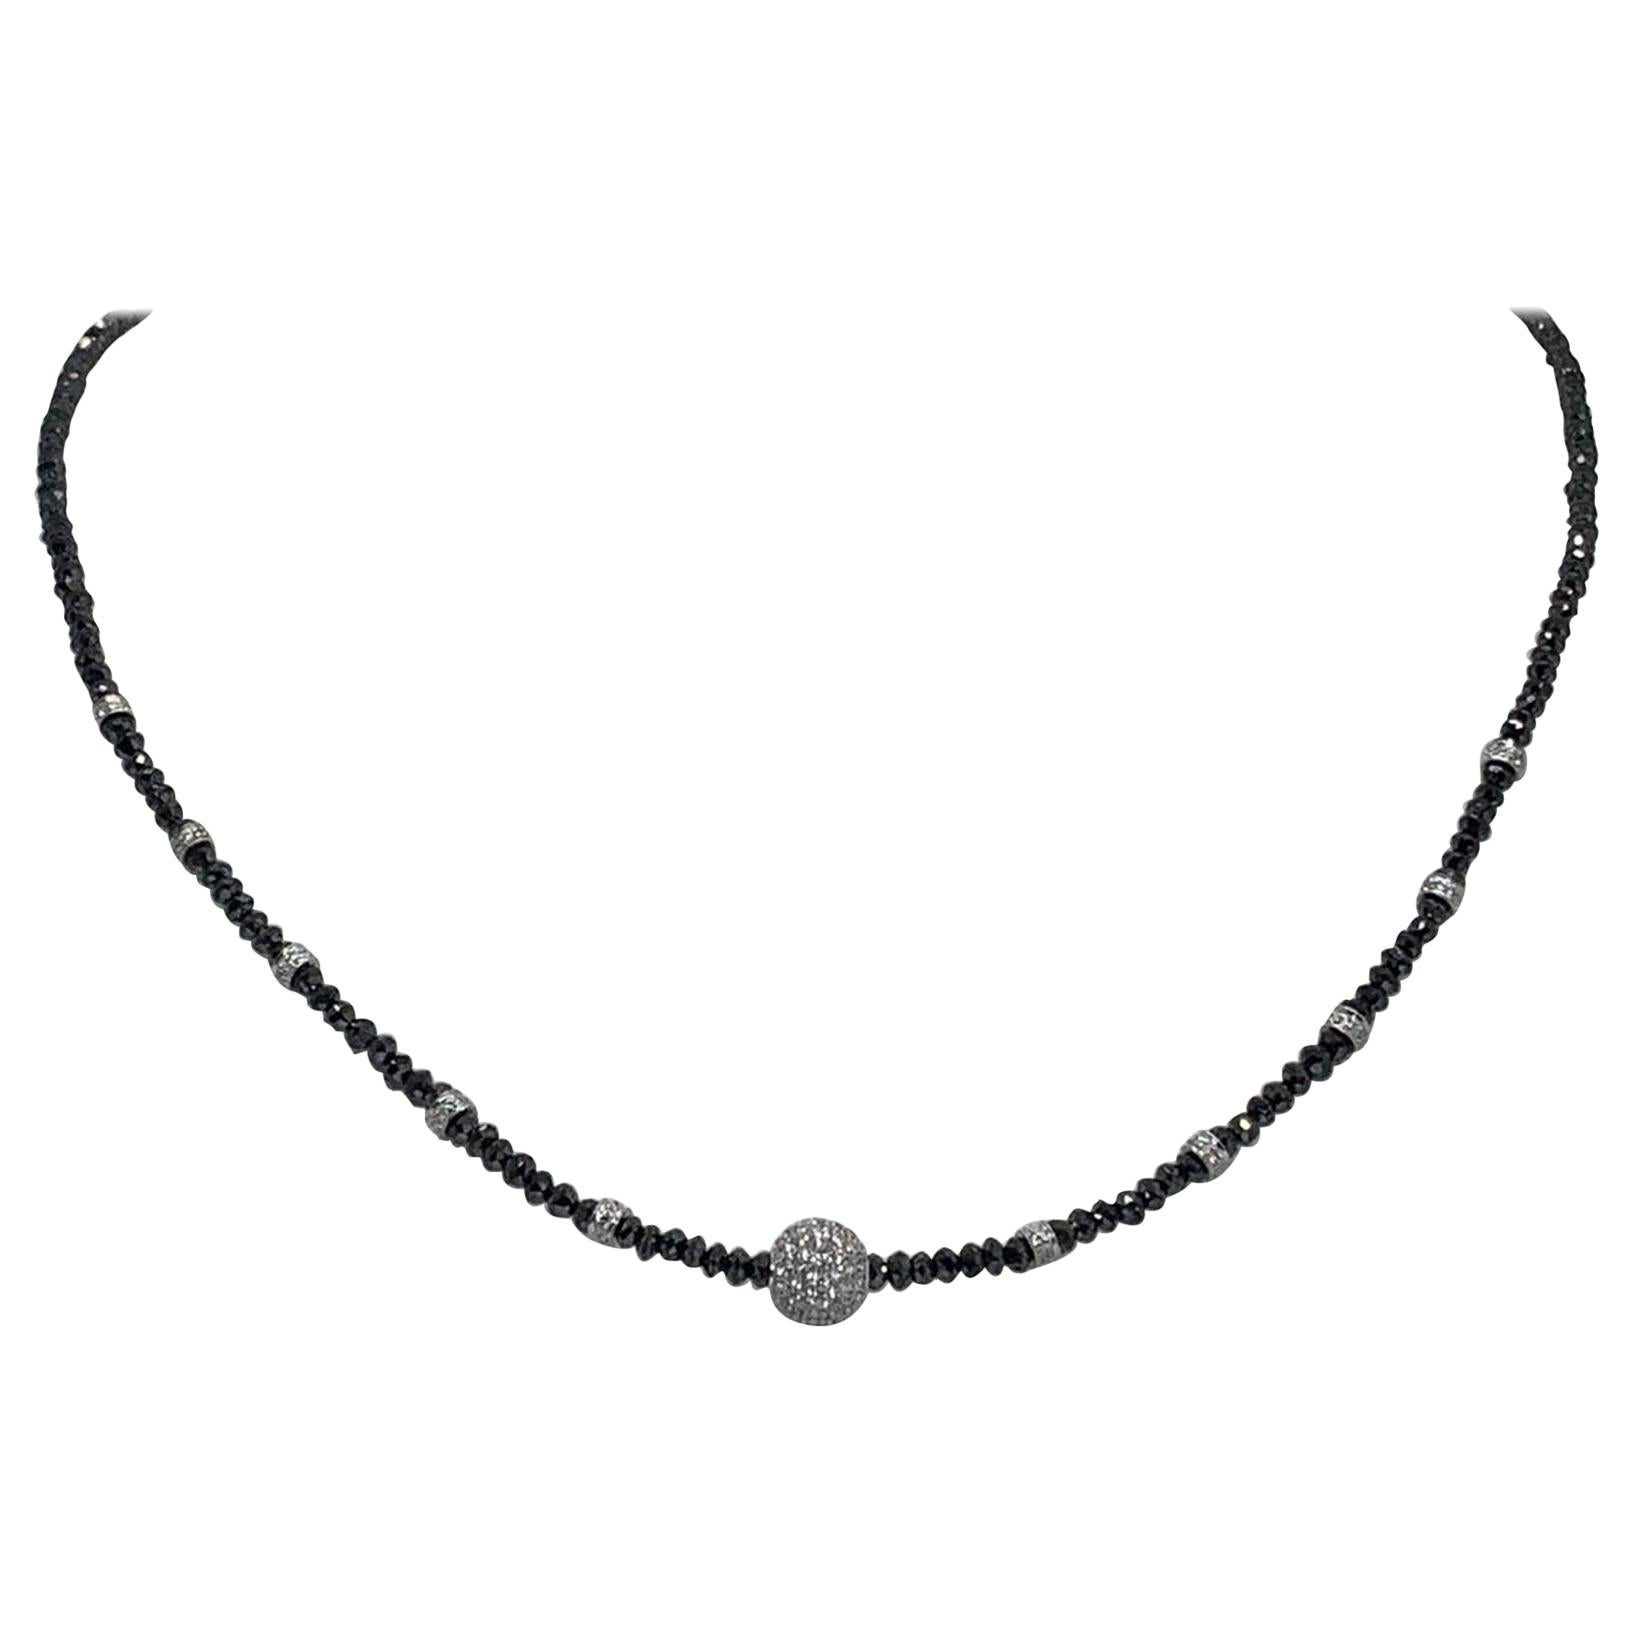 Diamond Black White Necklace 19 TCW 18k Gold Certified For Sale